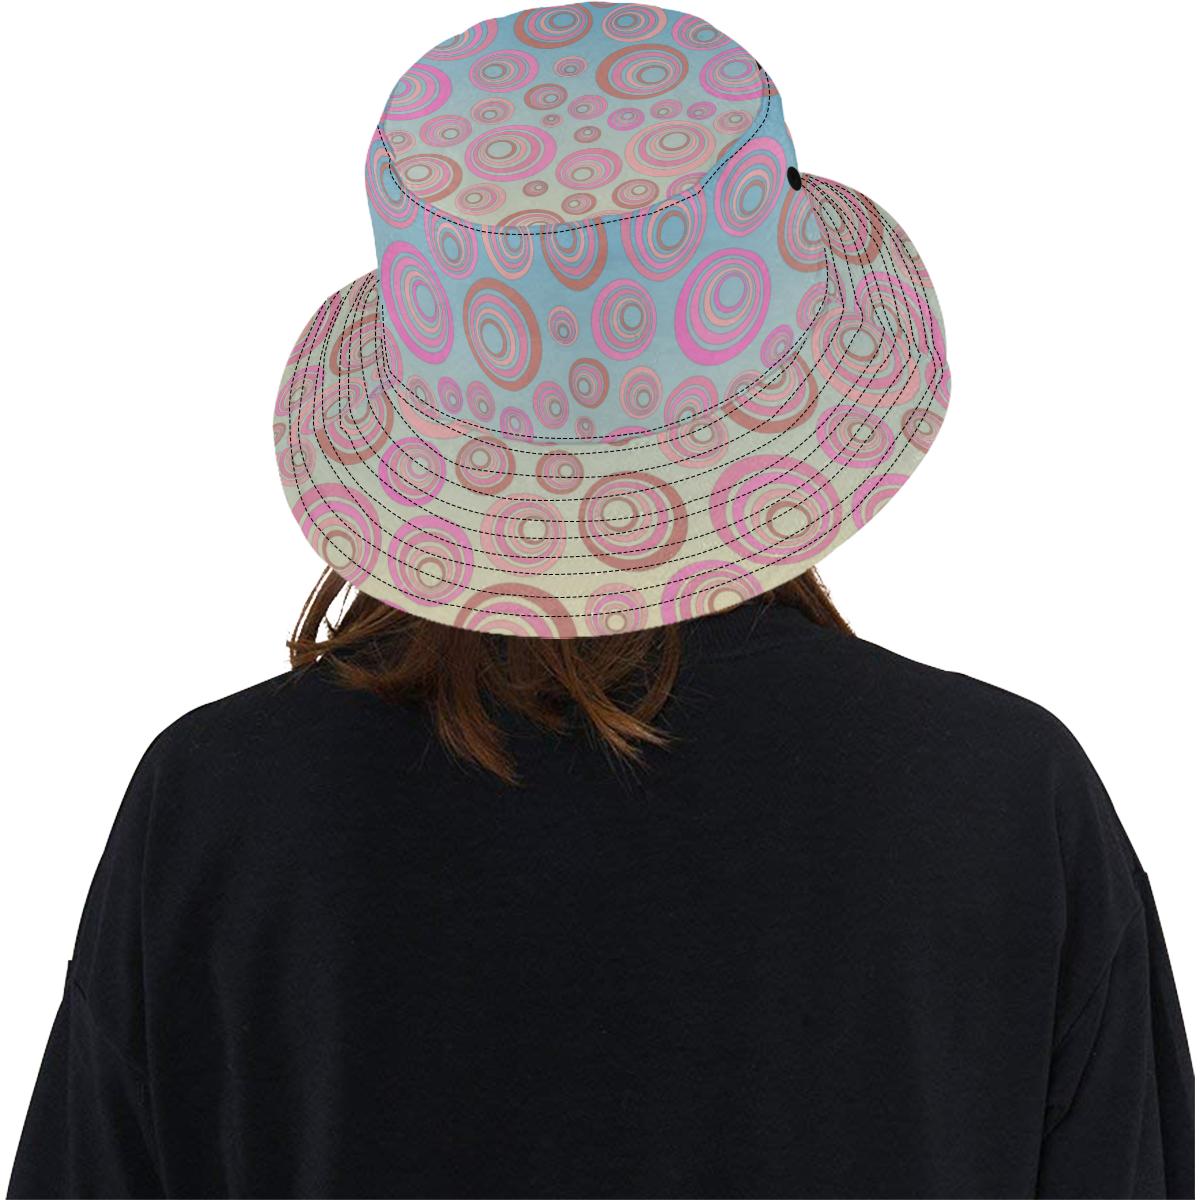 Retro Psychedelic Pink and Blue All Over Print Bucket Hat